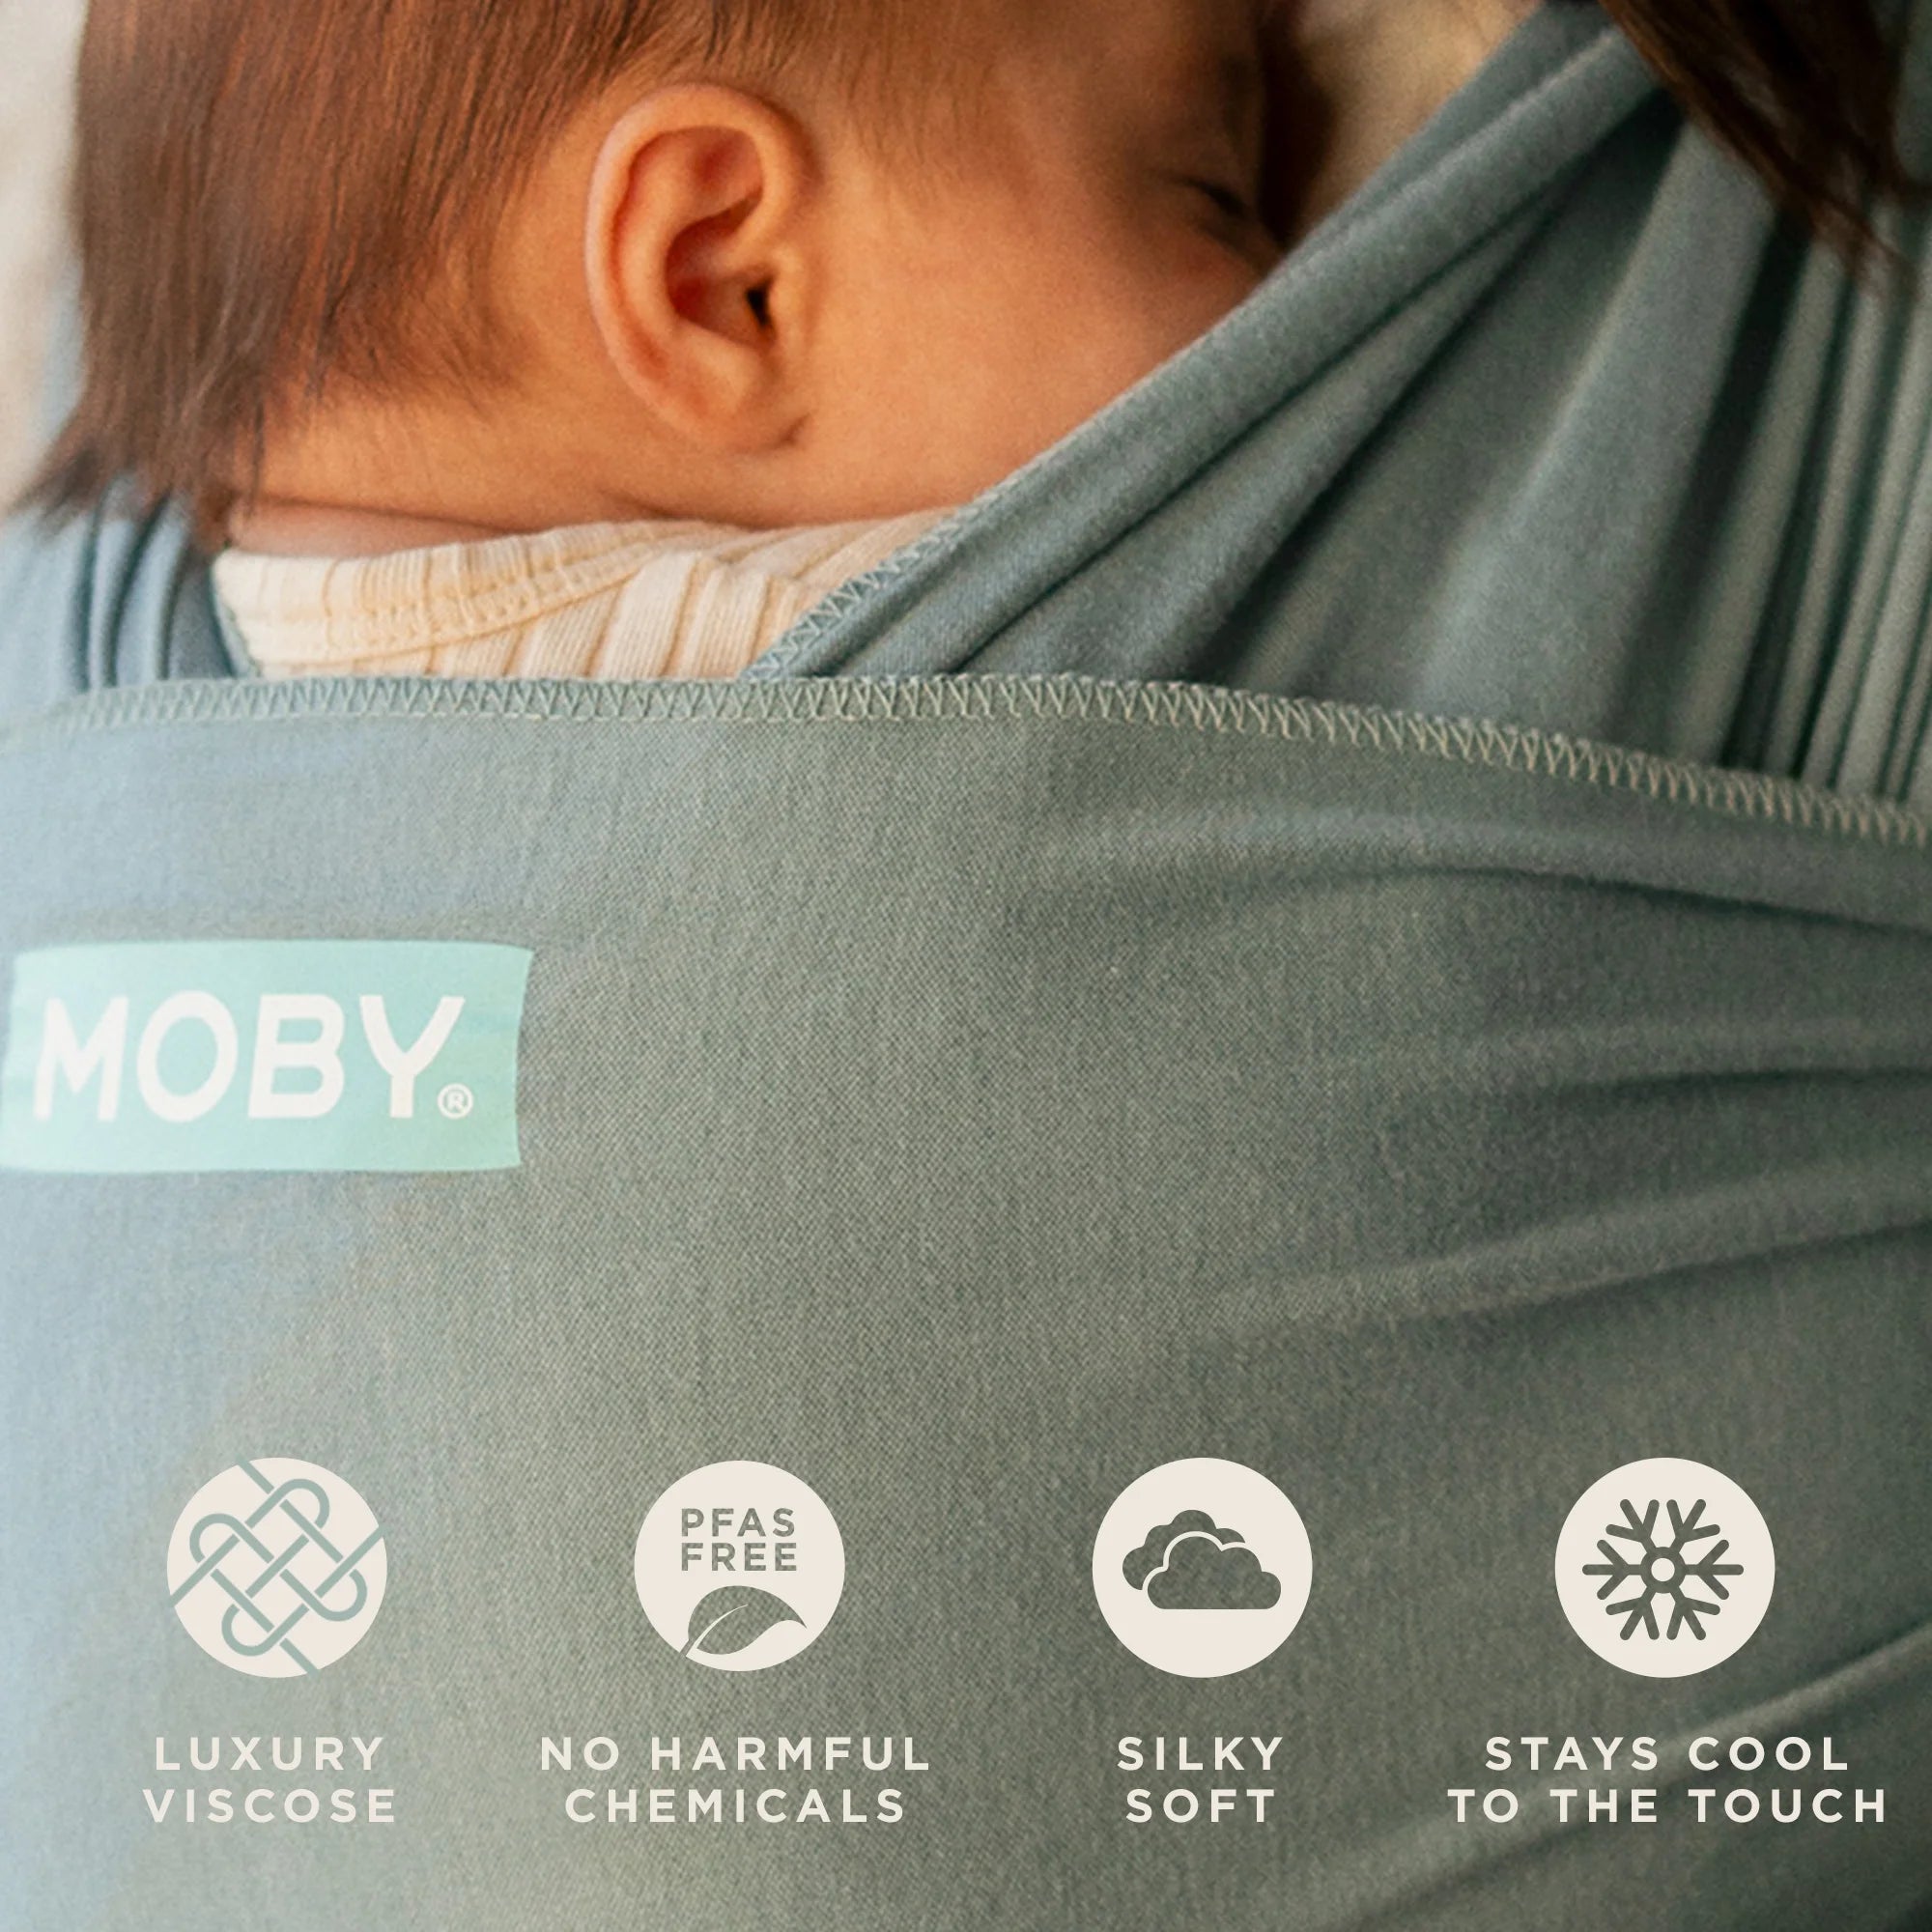 moby wrap evolution in sea glass is luxury viscose, no harmful chemicals and pfas free, silky soft, and stays cool to the touch